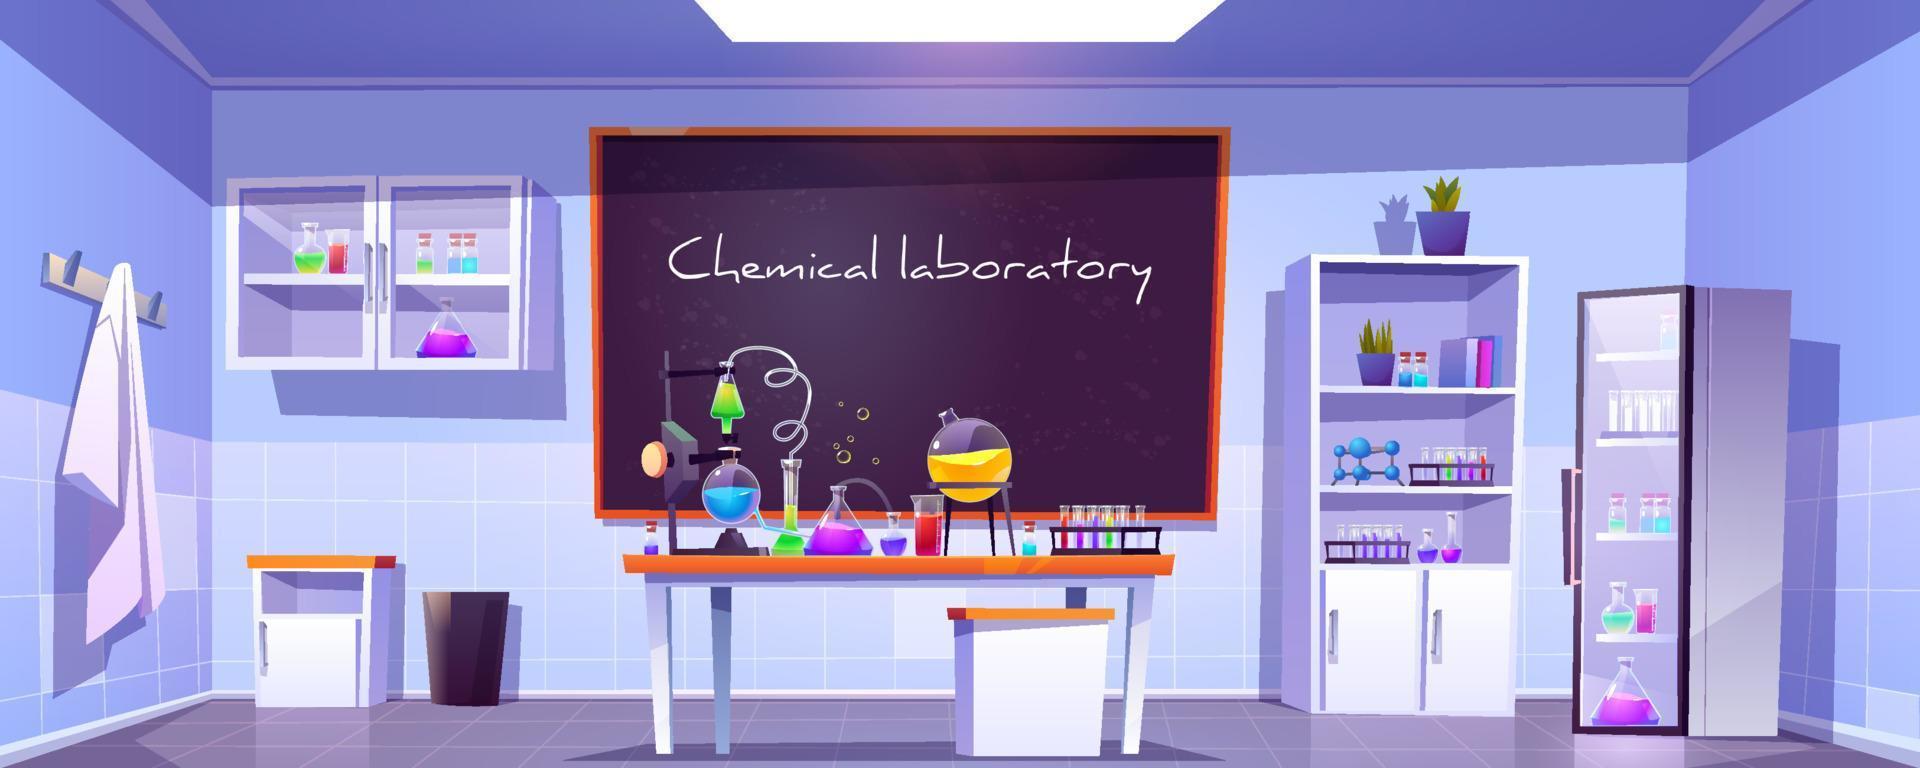 Chemical laboratory, empty chemistry cabinet, room vector